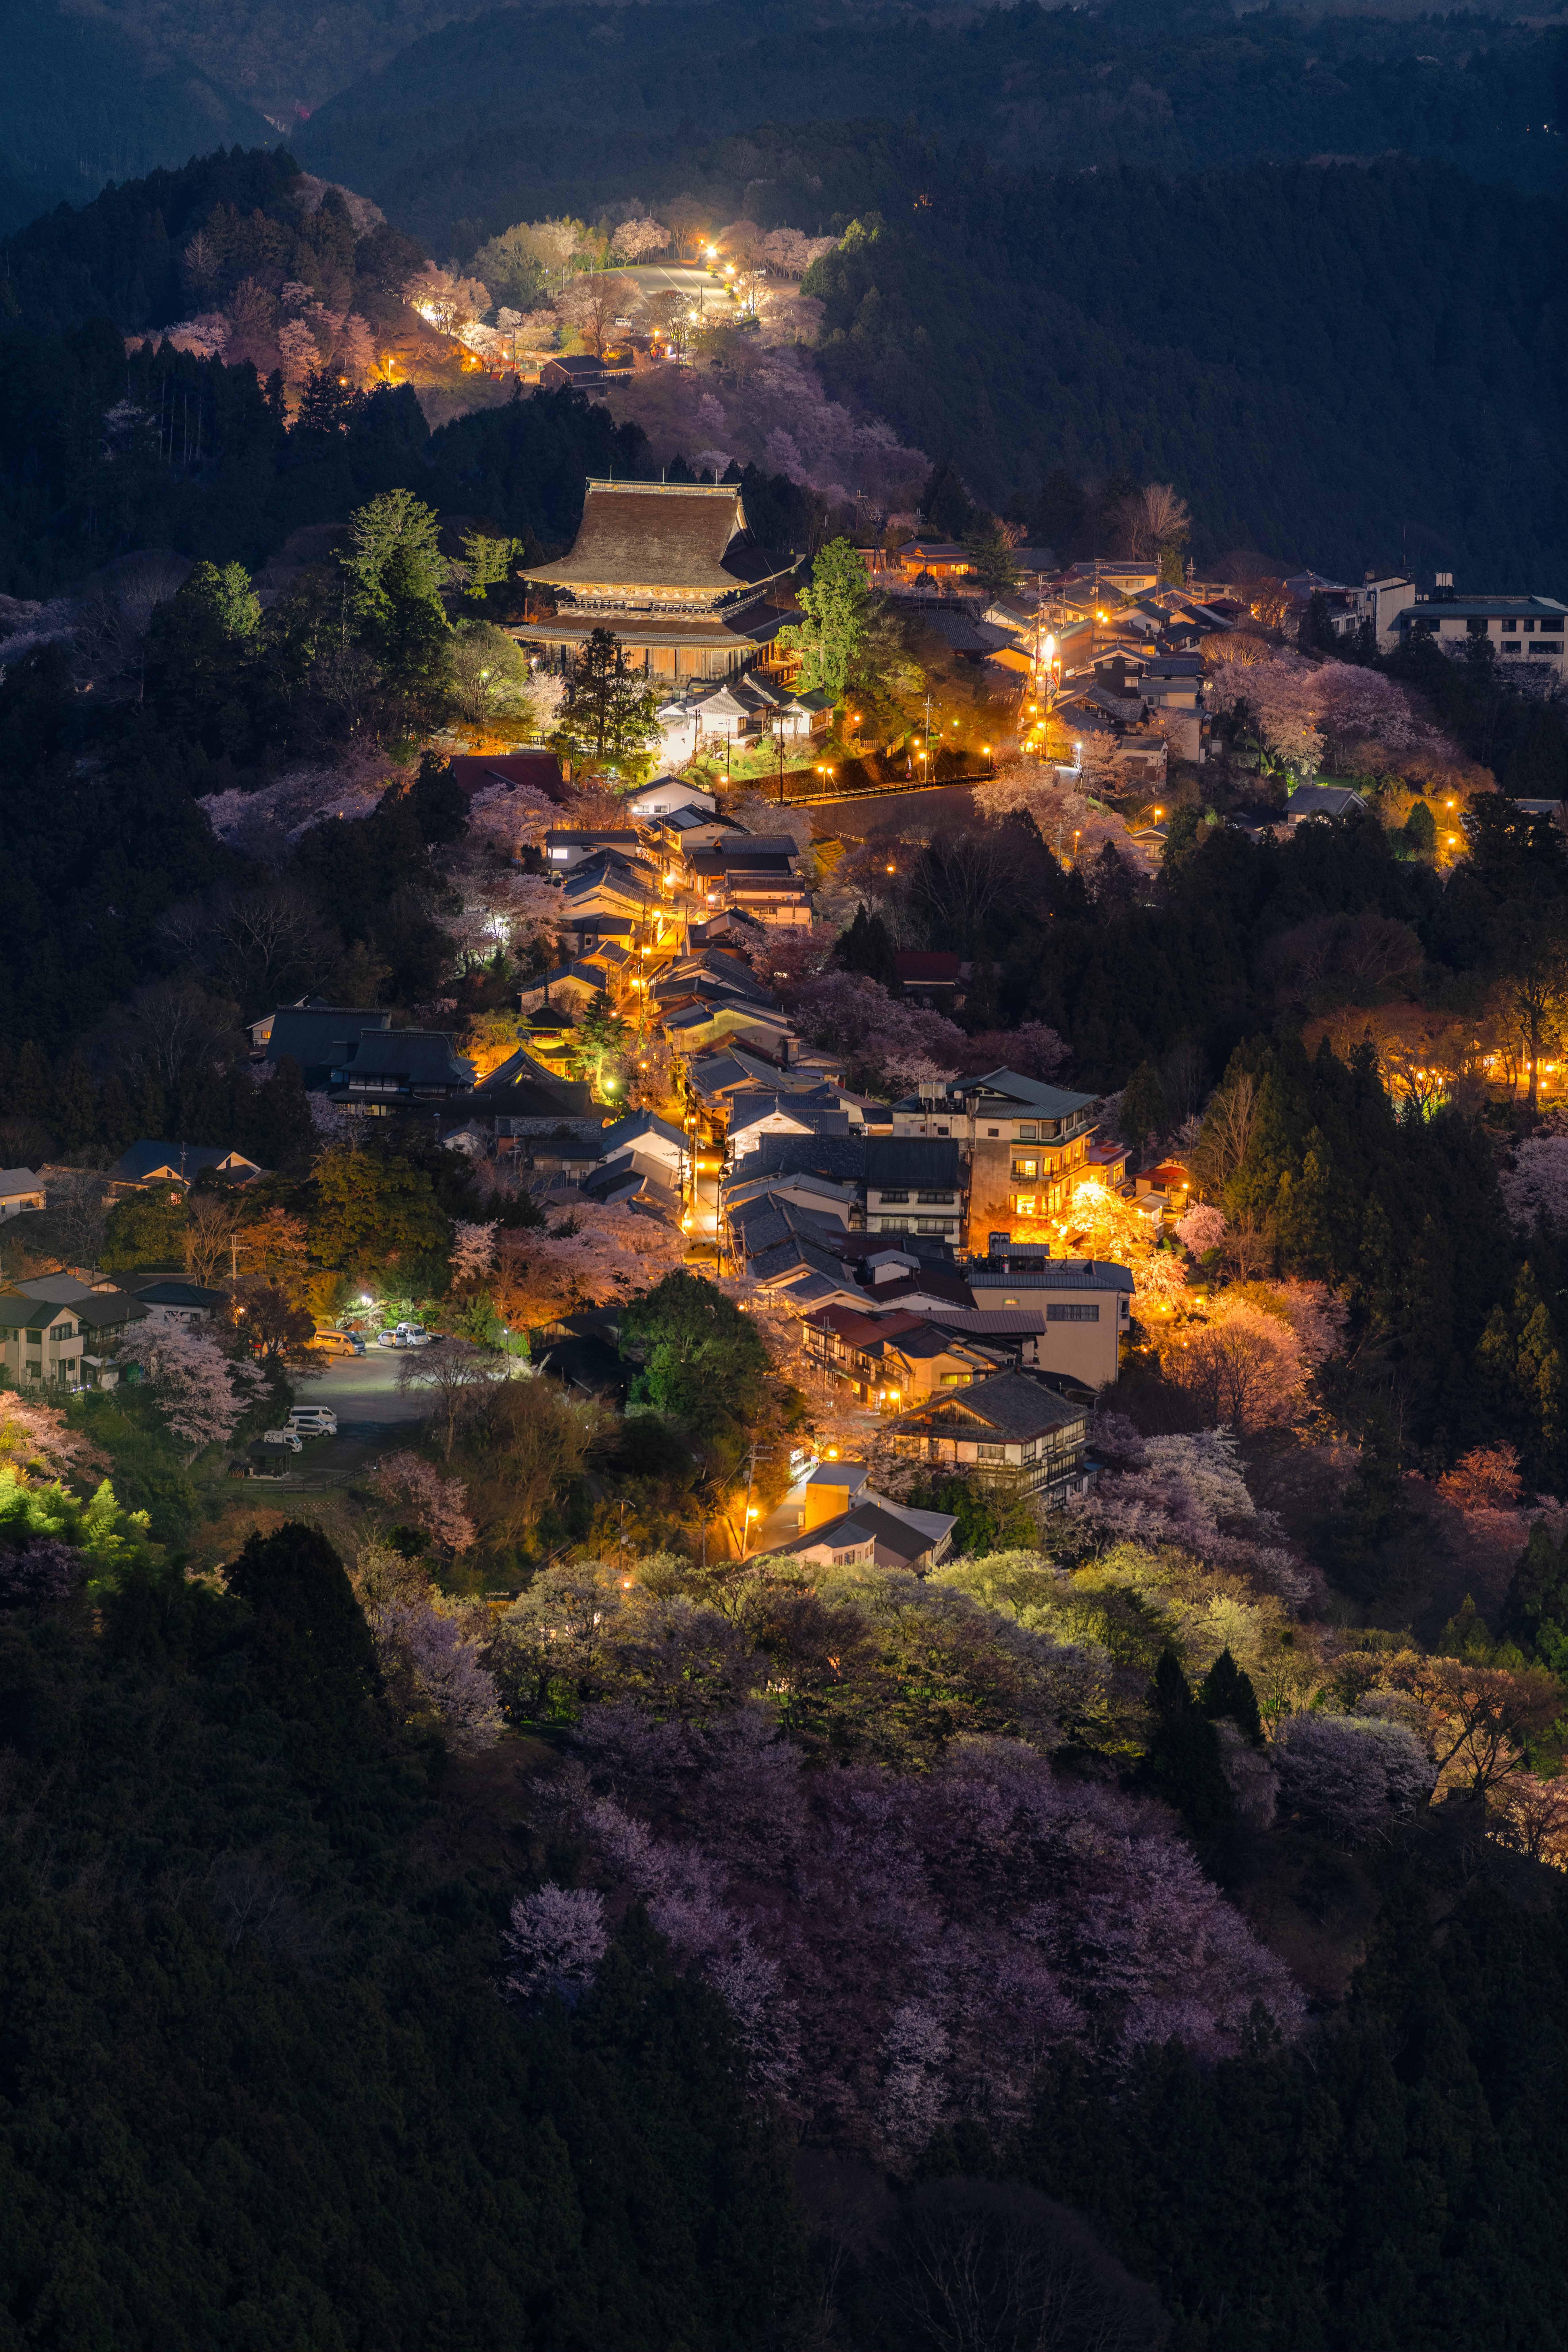 One of the most beautiful cherry blossom locations in Japan, Mt